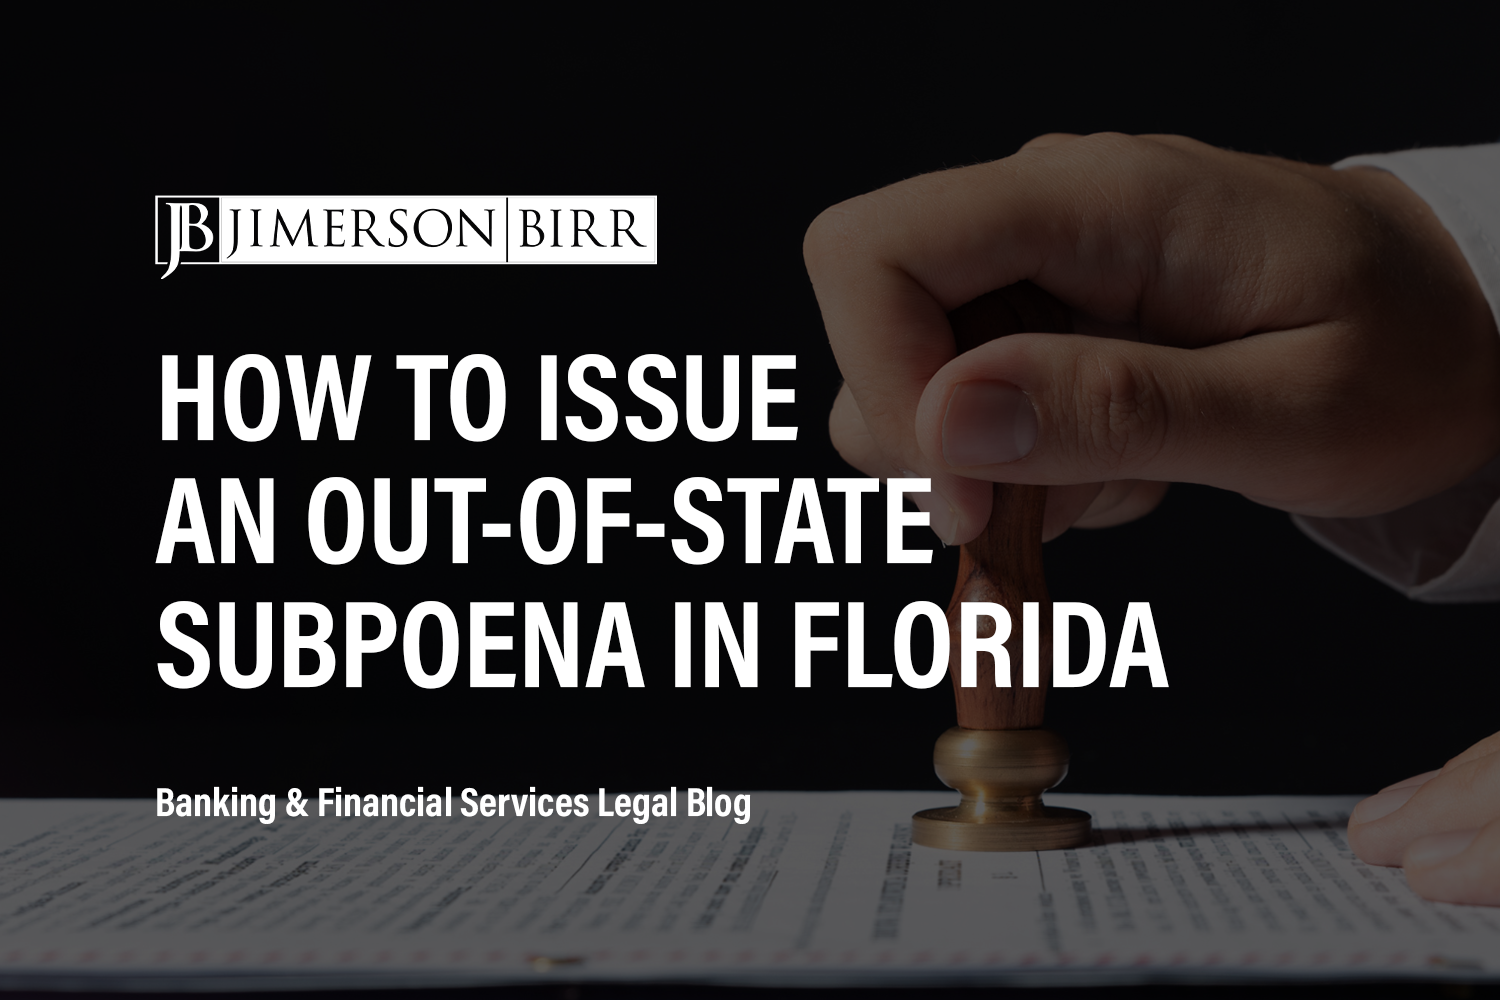 How to Issue an Out-of-State Subpoena in Florida